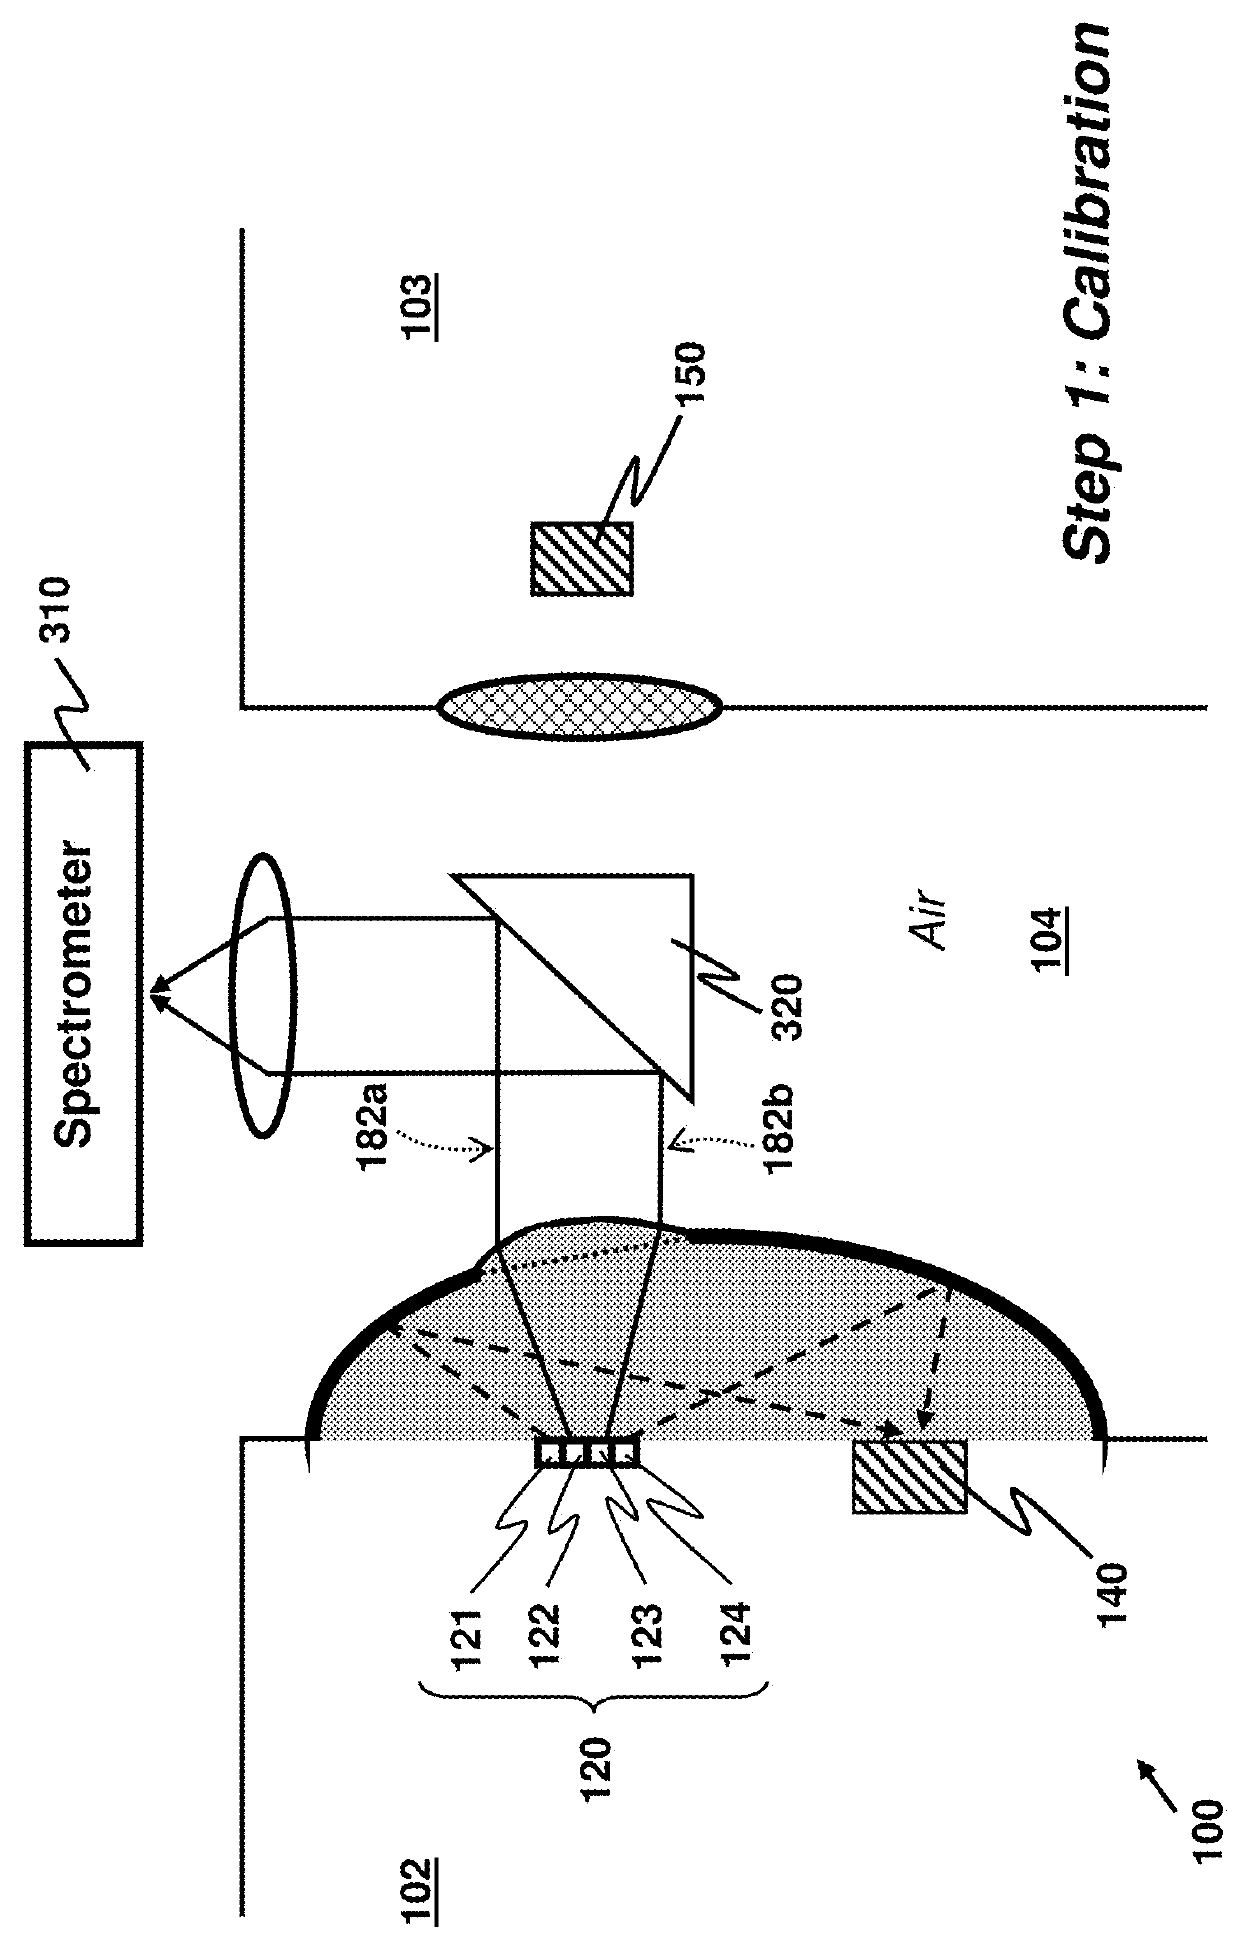 Compact Device for Sensing a Liquid with Energy Harvesting from Liquid Motion